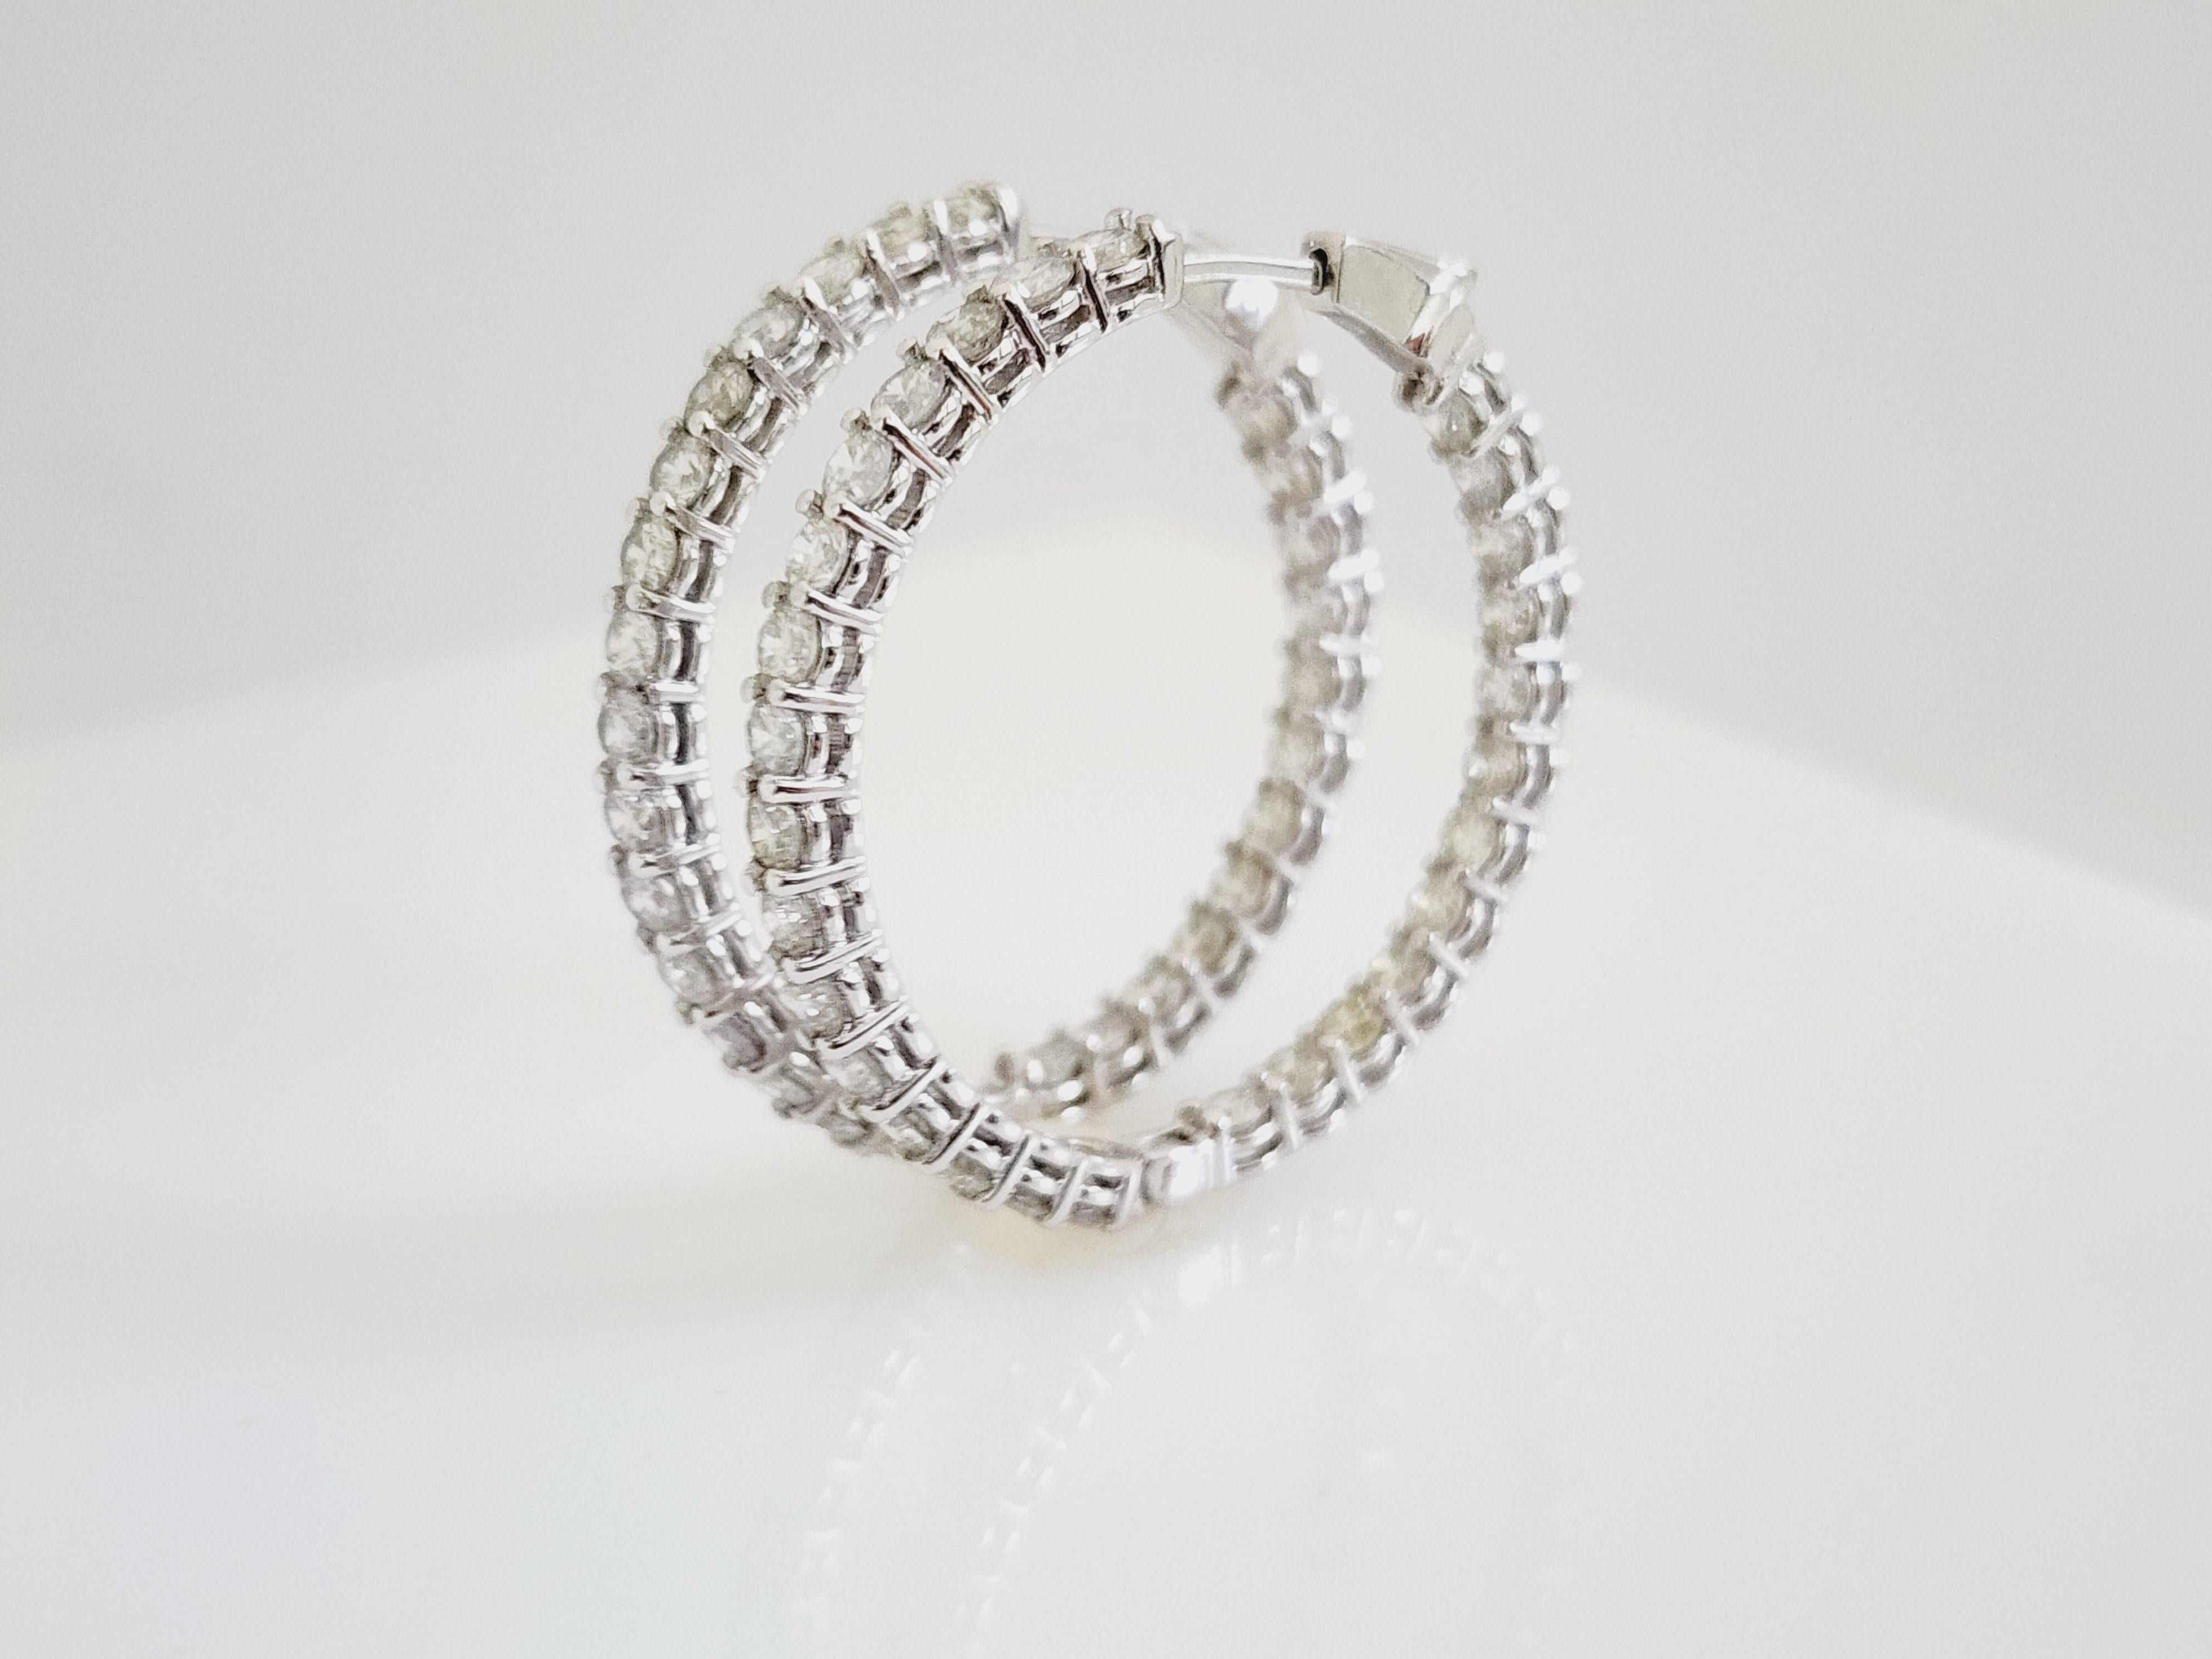 6.55 Carat Diamond Hoops Earrings 14 Karat White Gold In New Condition For Sale In Great Neck, NY